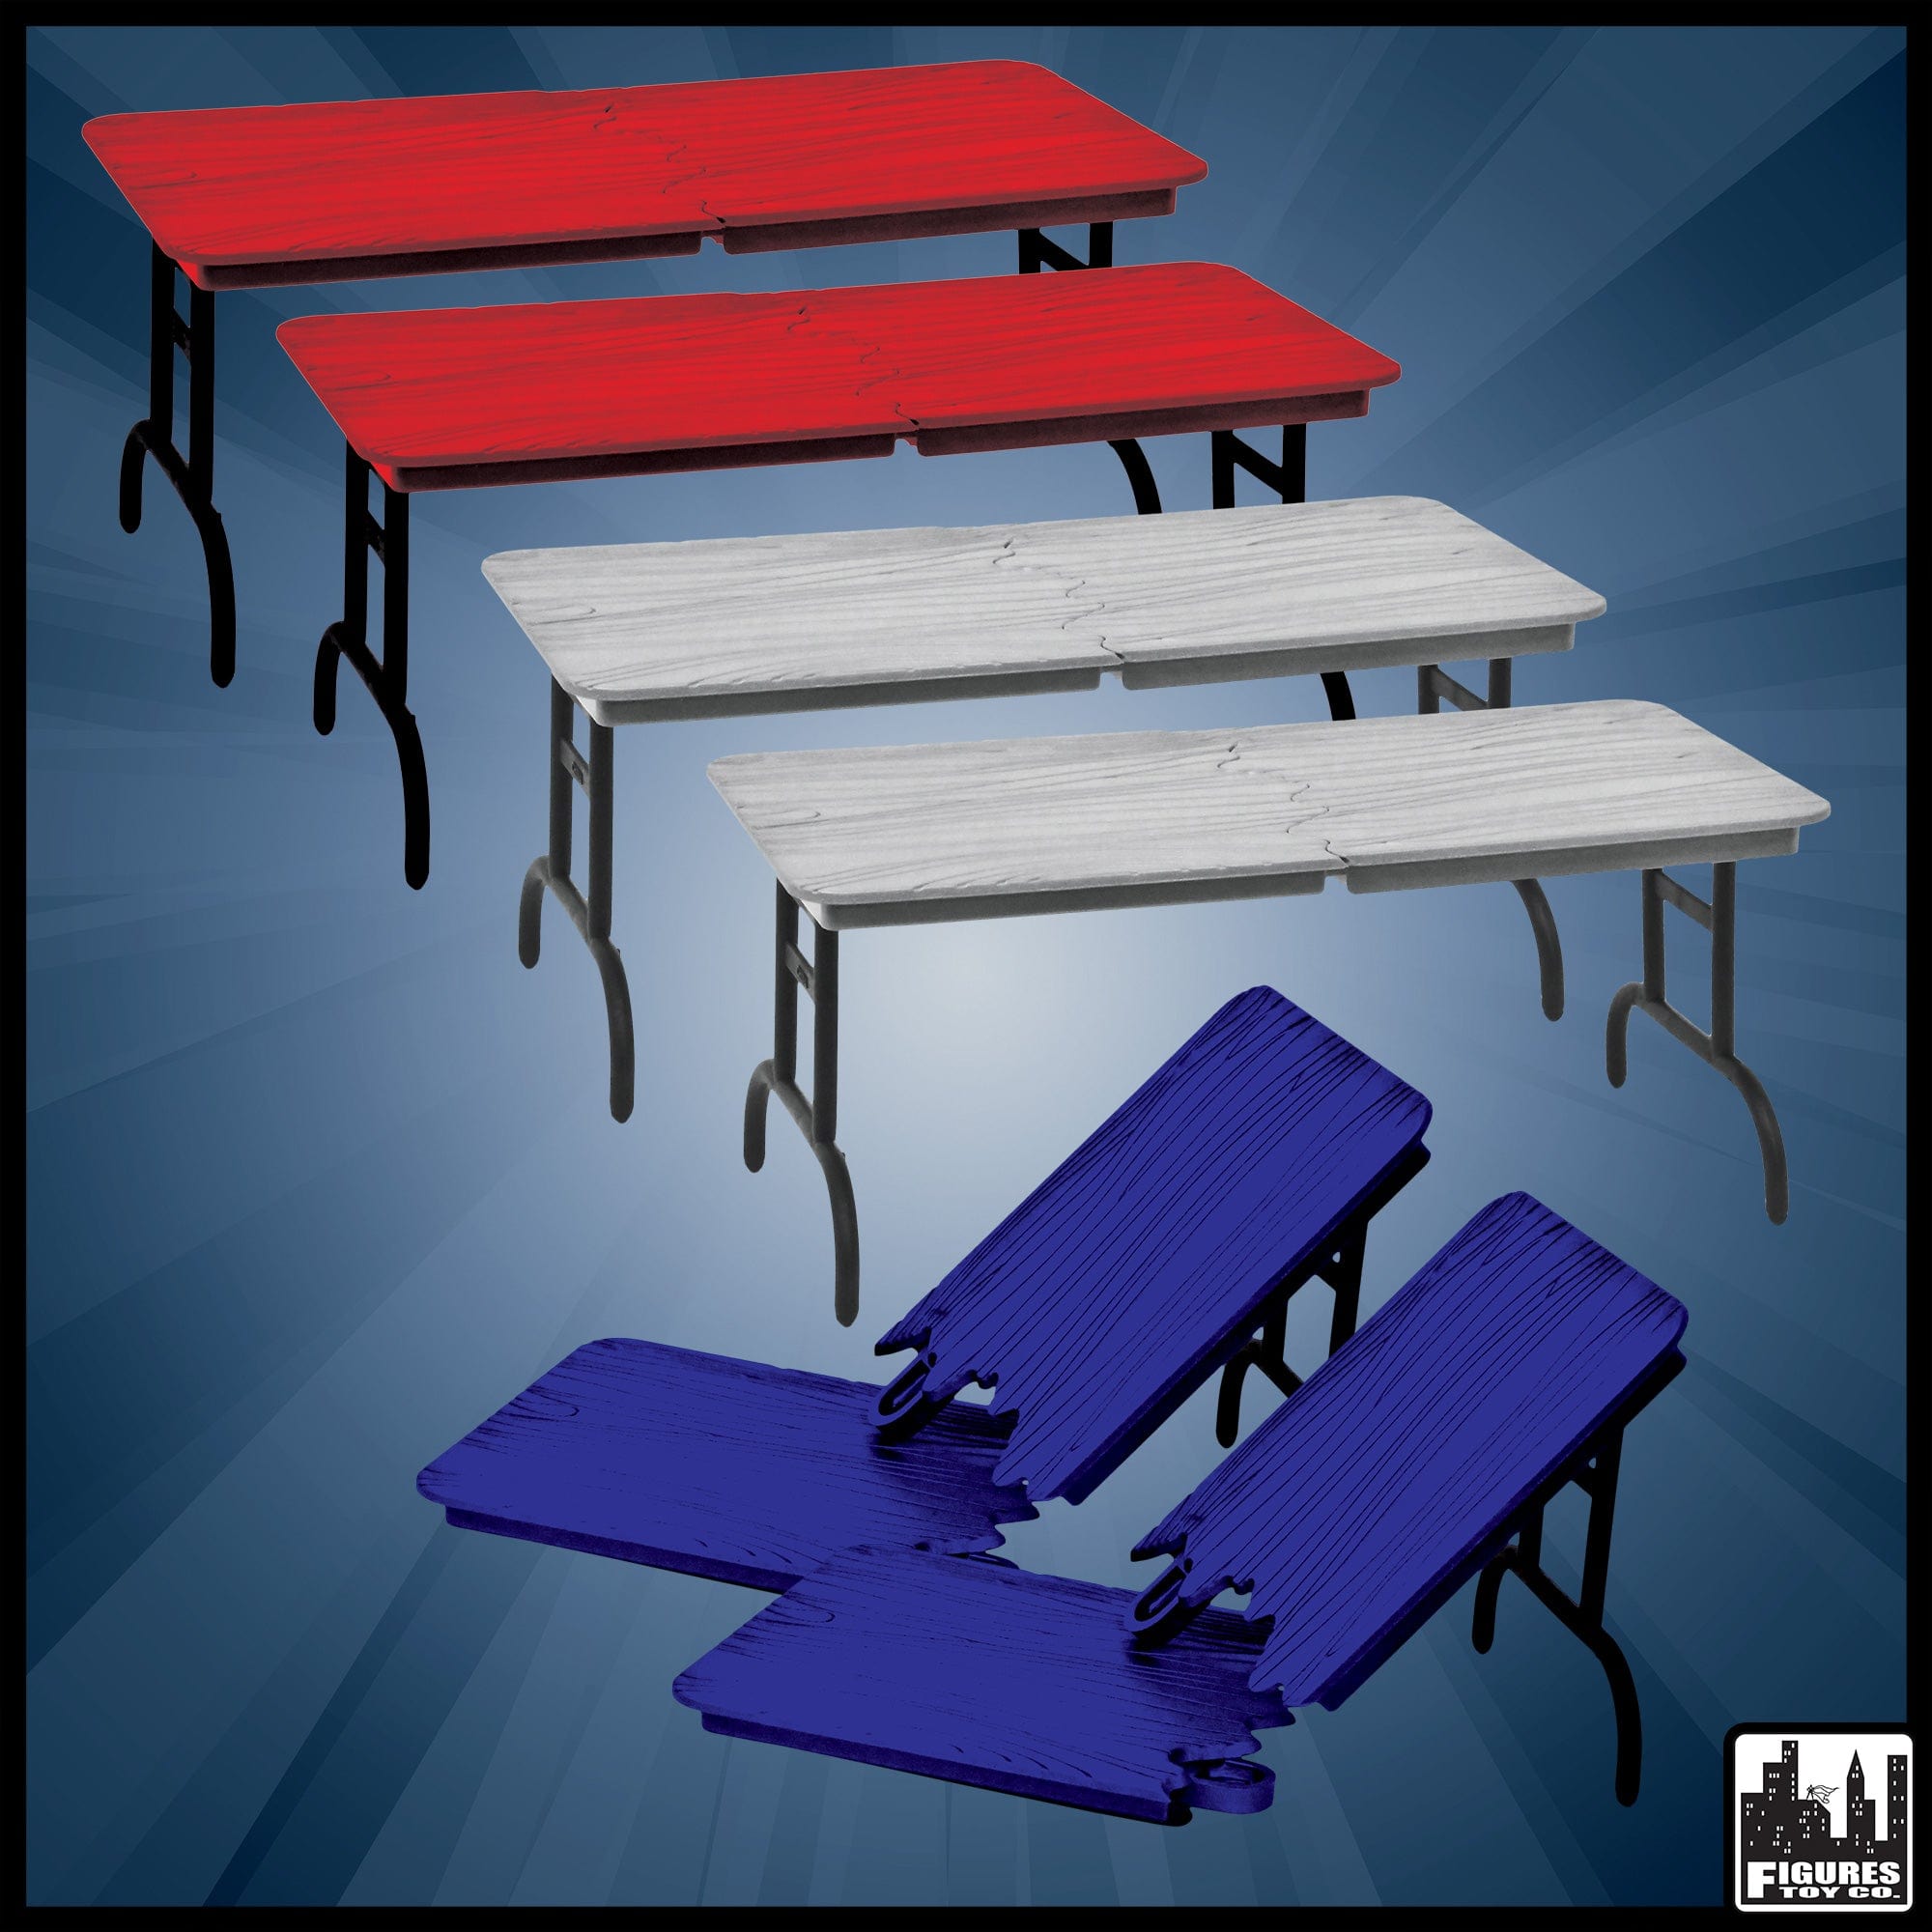 6 Piece Breakable Table Deal for WWE Wrestling Action Figures: Red, Blue & Gray